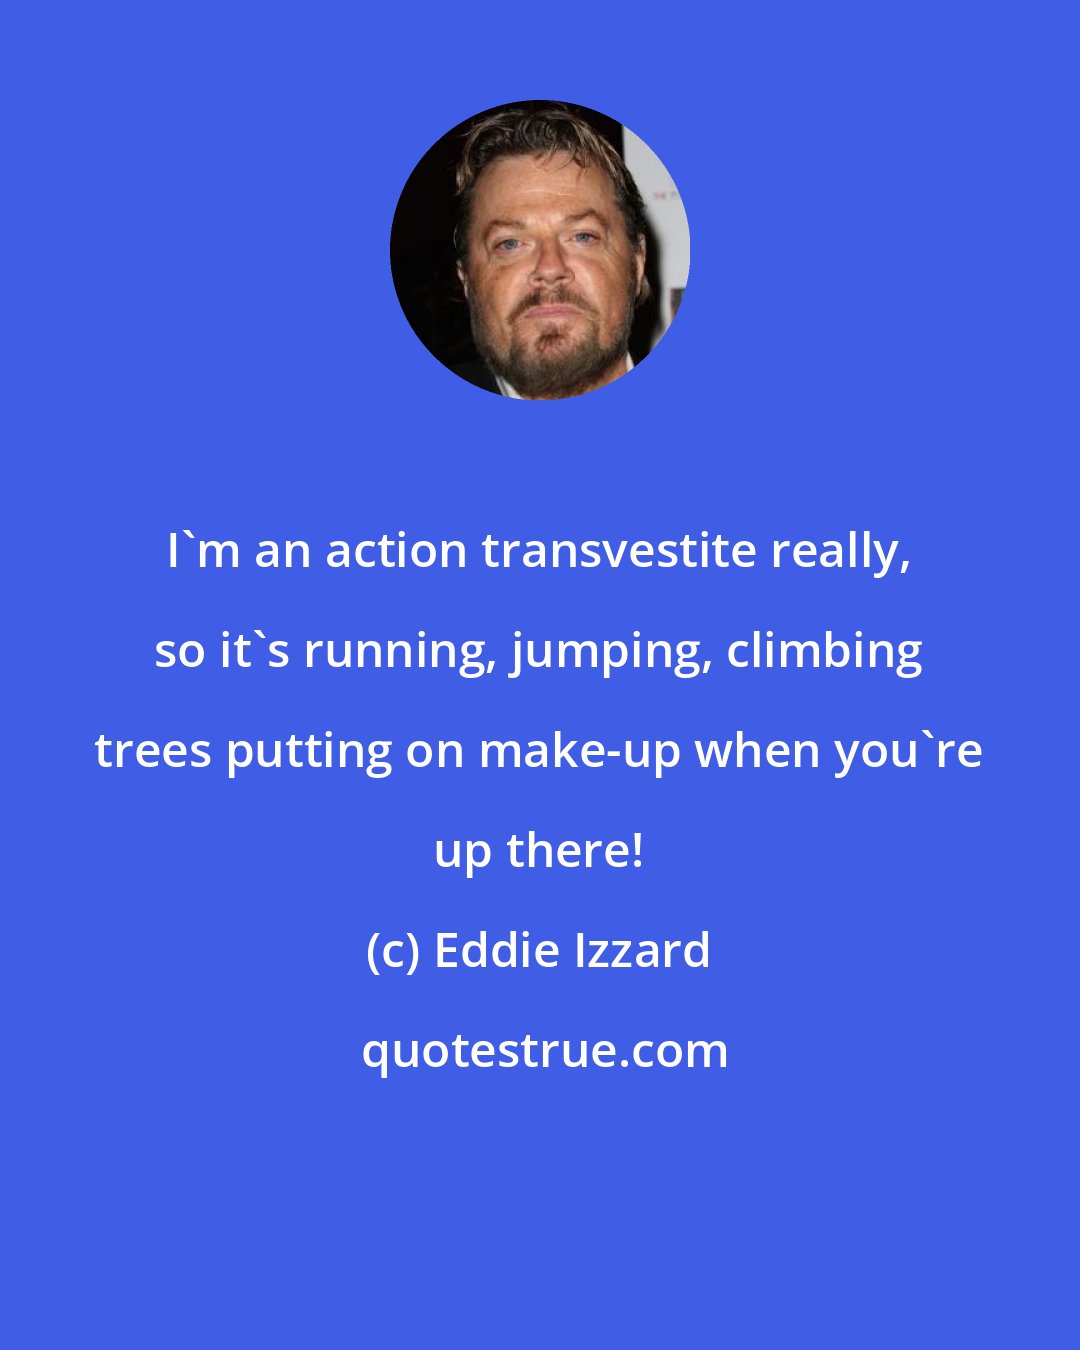 Eddie Izzard: I'm an action transvestite really, so it's running, jumping, climbing trees putting on make-up when you're up there!